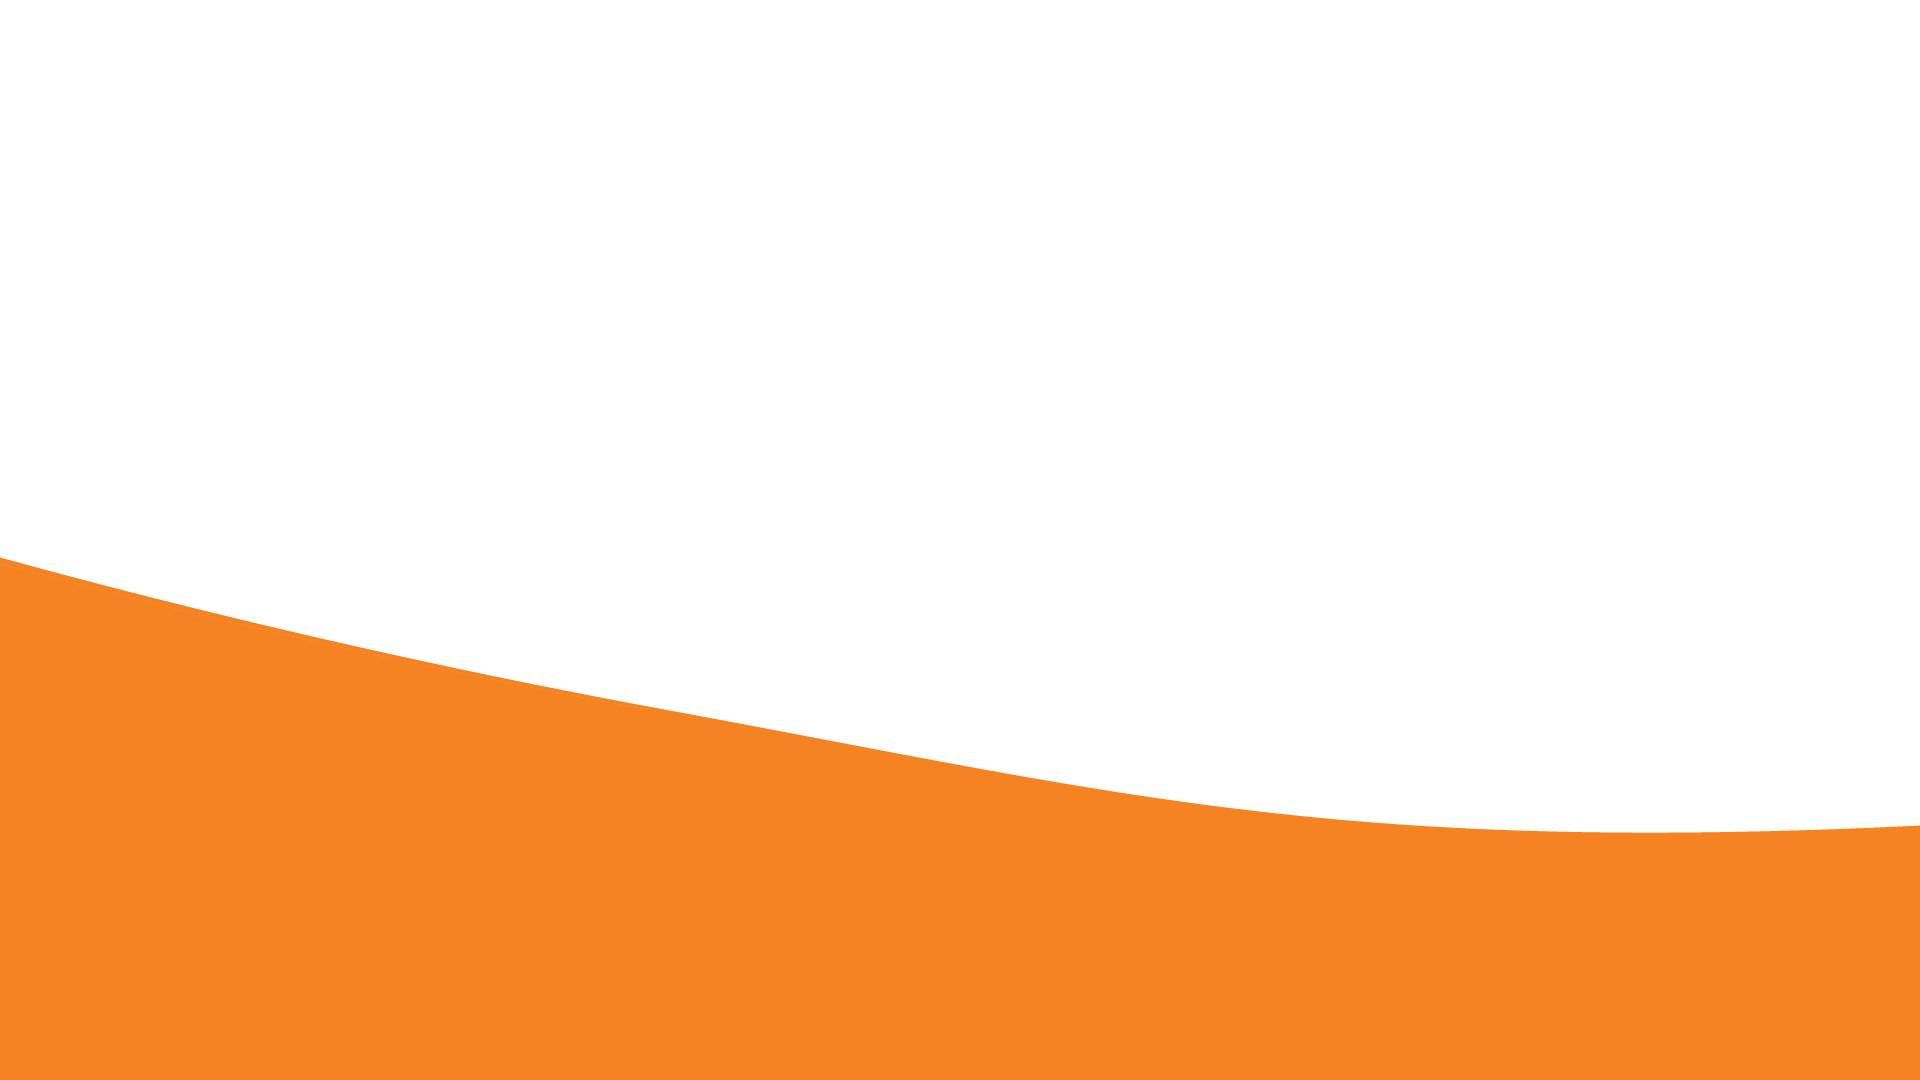 An orange curve that starts high from the left and starts to decline to the right